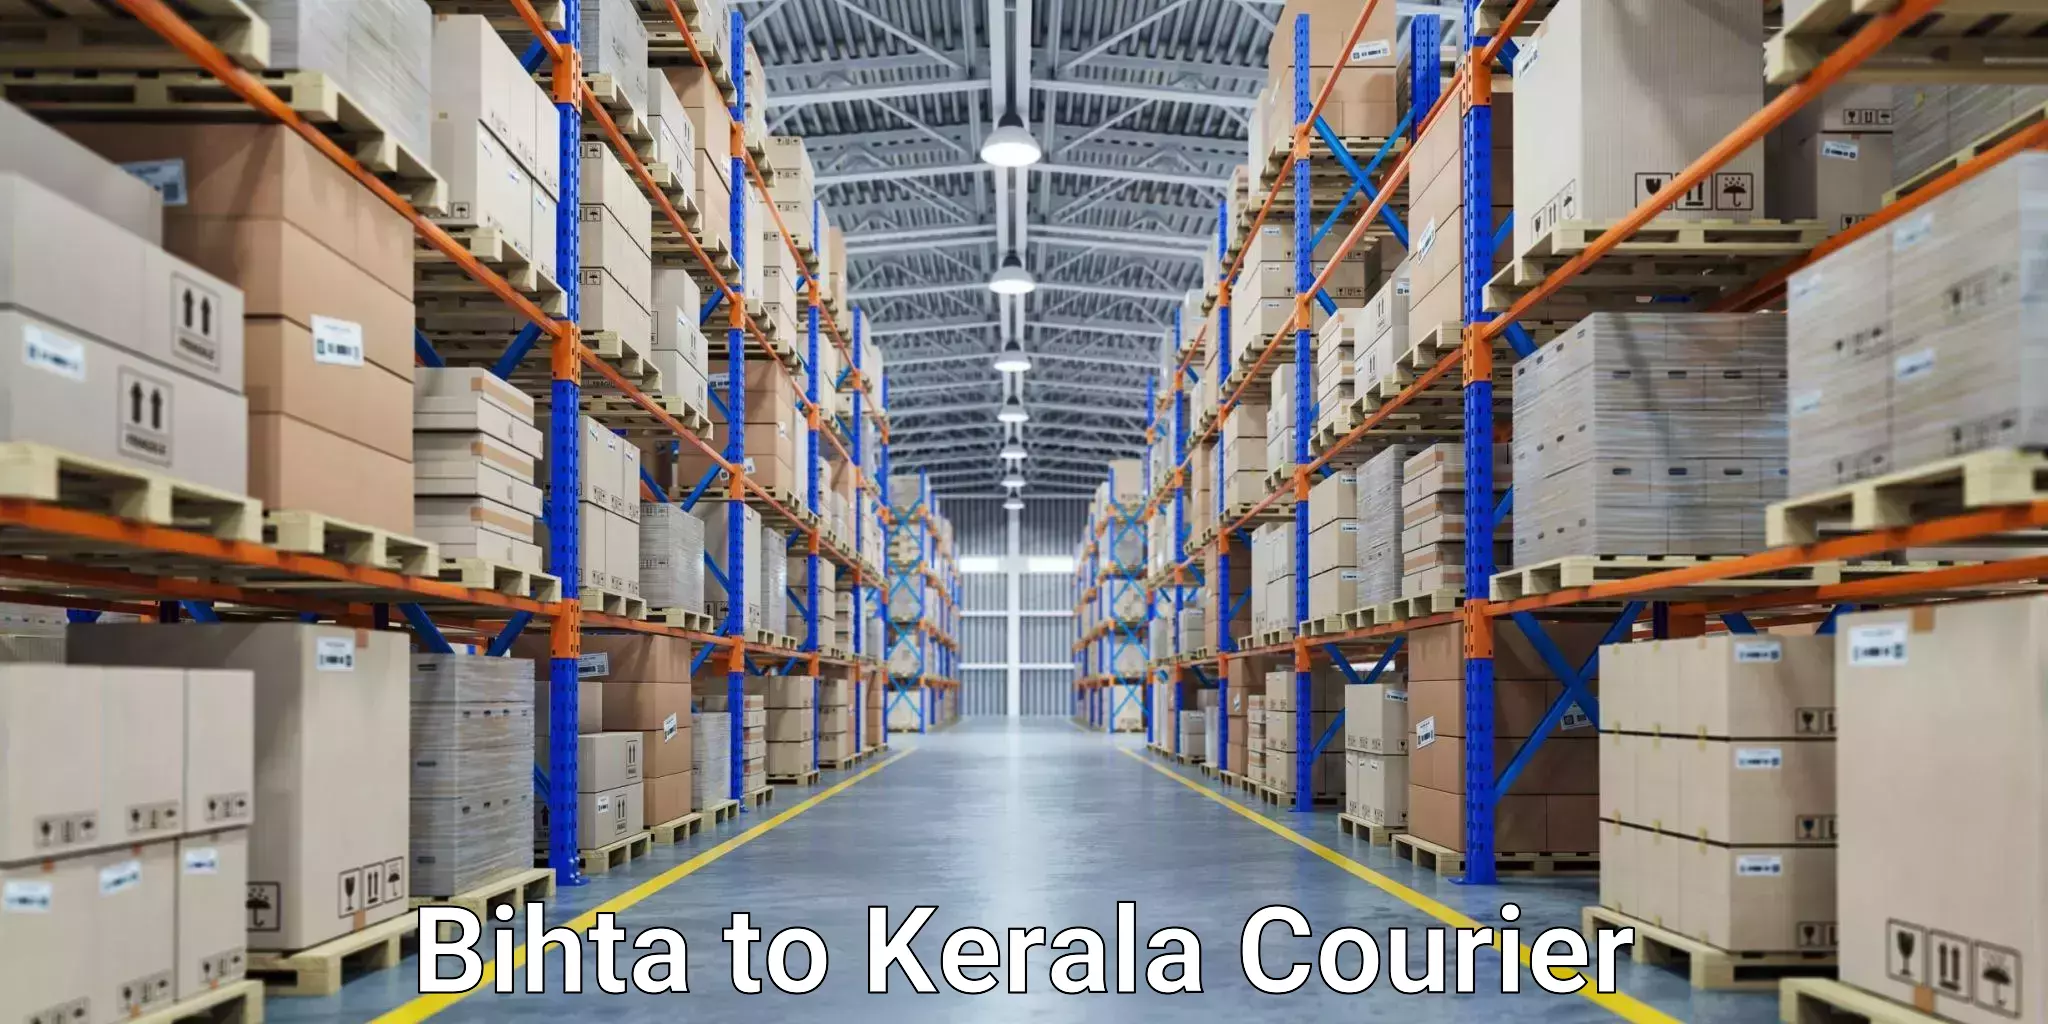 Delivery service partnership in Bihta to Kozhikode